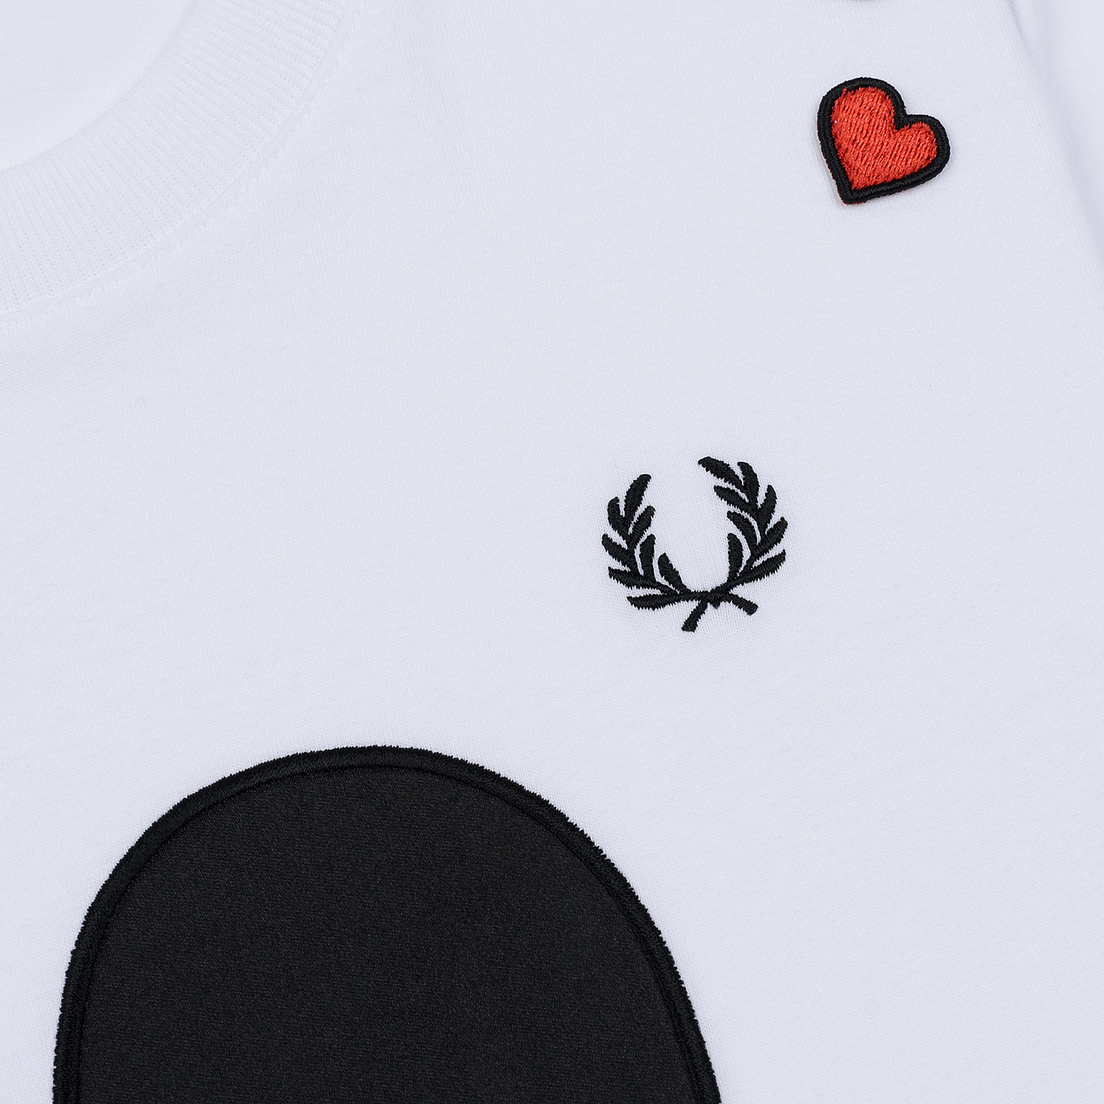 Fred Perry Женская футболка x Amy Winehouse Heart Detail